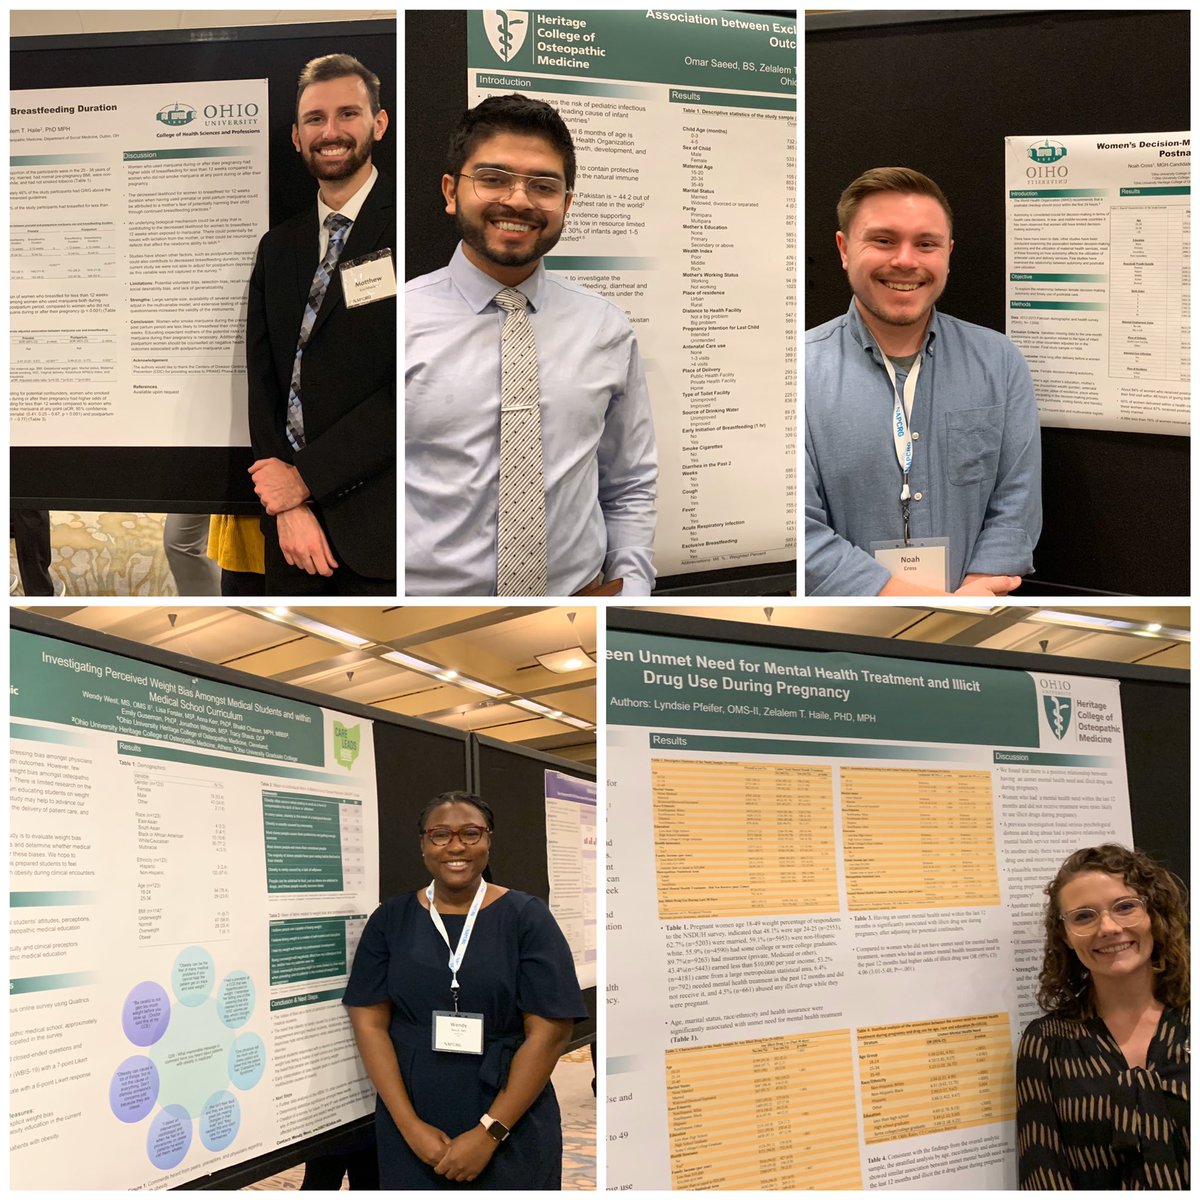 What a day for #medstudent poster presentations by @OUHCOM @OUHCOMSocMed students. #NAPCRG2019 They made @ohiou proud. @BobcatsDiscover @NAPCRG